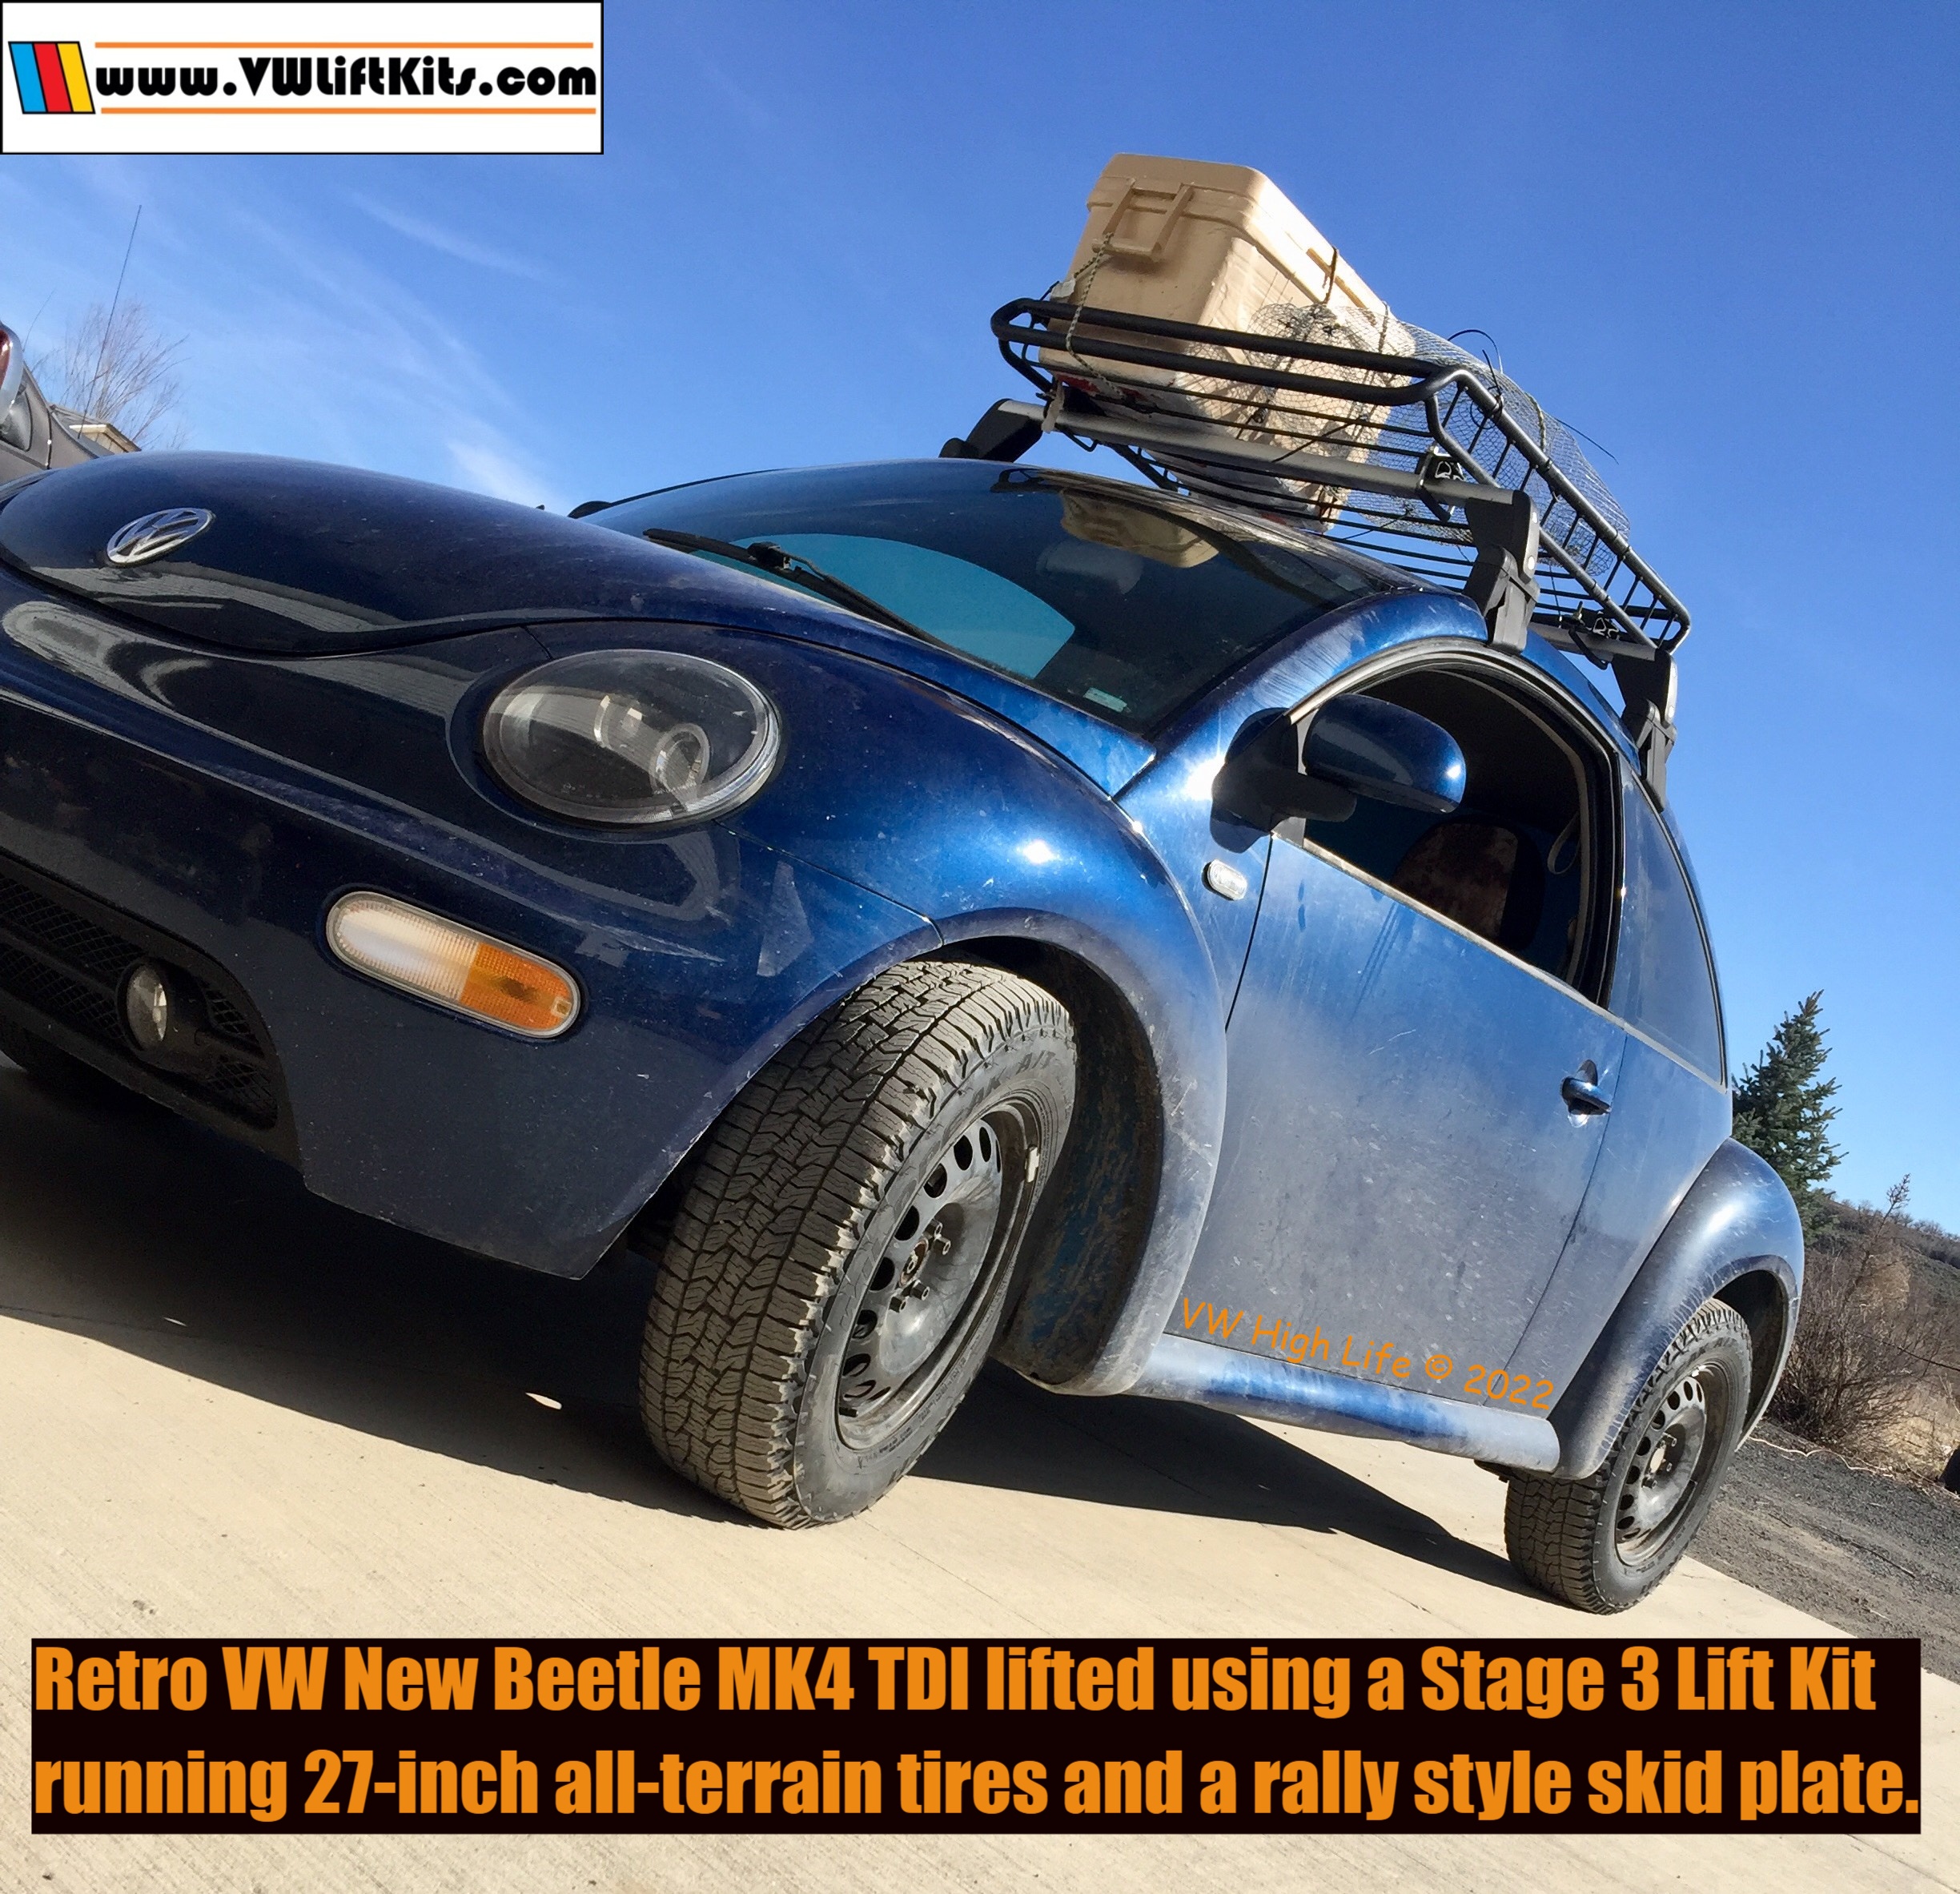 Adrian properly raised his retro Beetle TDI to run 27-inch AT tires & a skid plate for some desert fun!